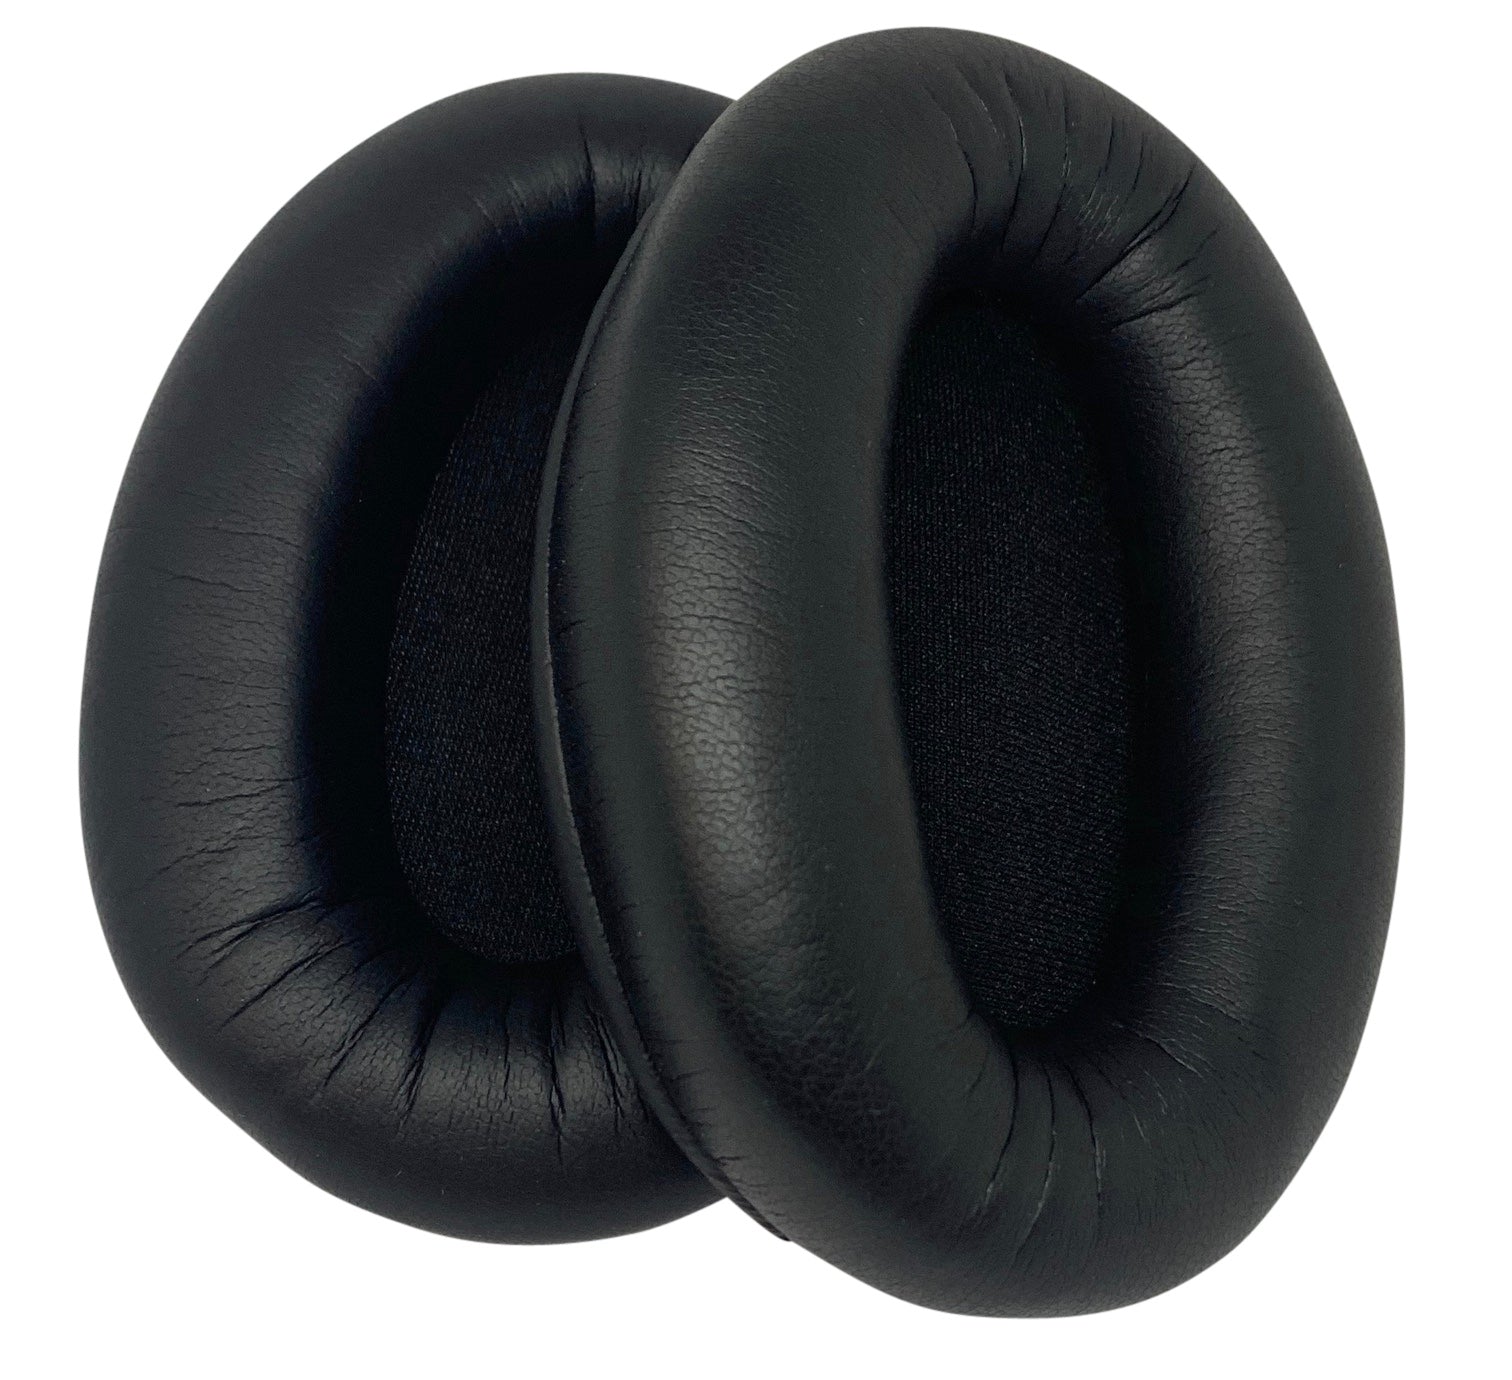 Pair Replacement Ear Pad Cushions Parts for Sony WH-1000XM3 Wireless  Headphones | CentralSound